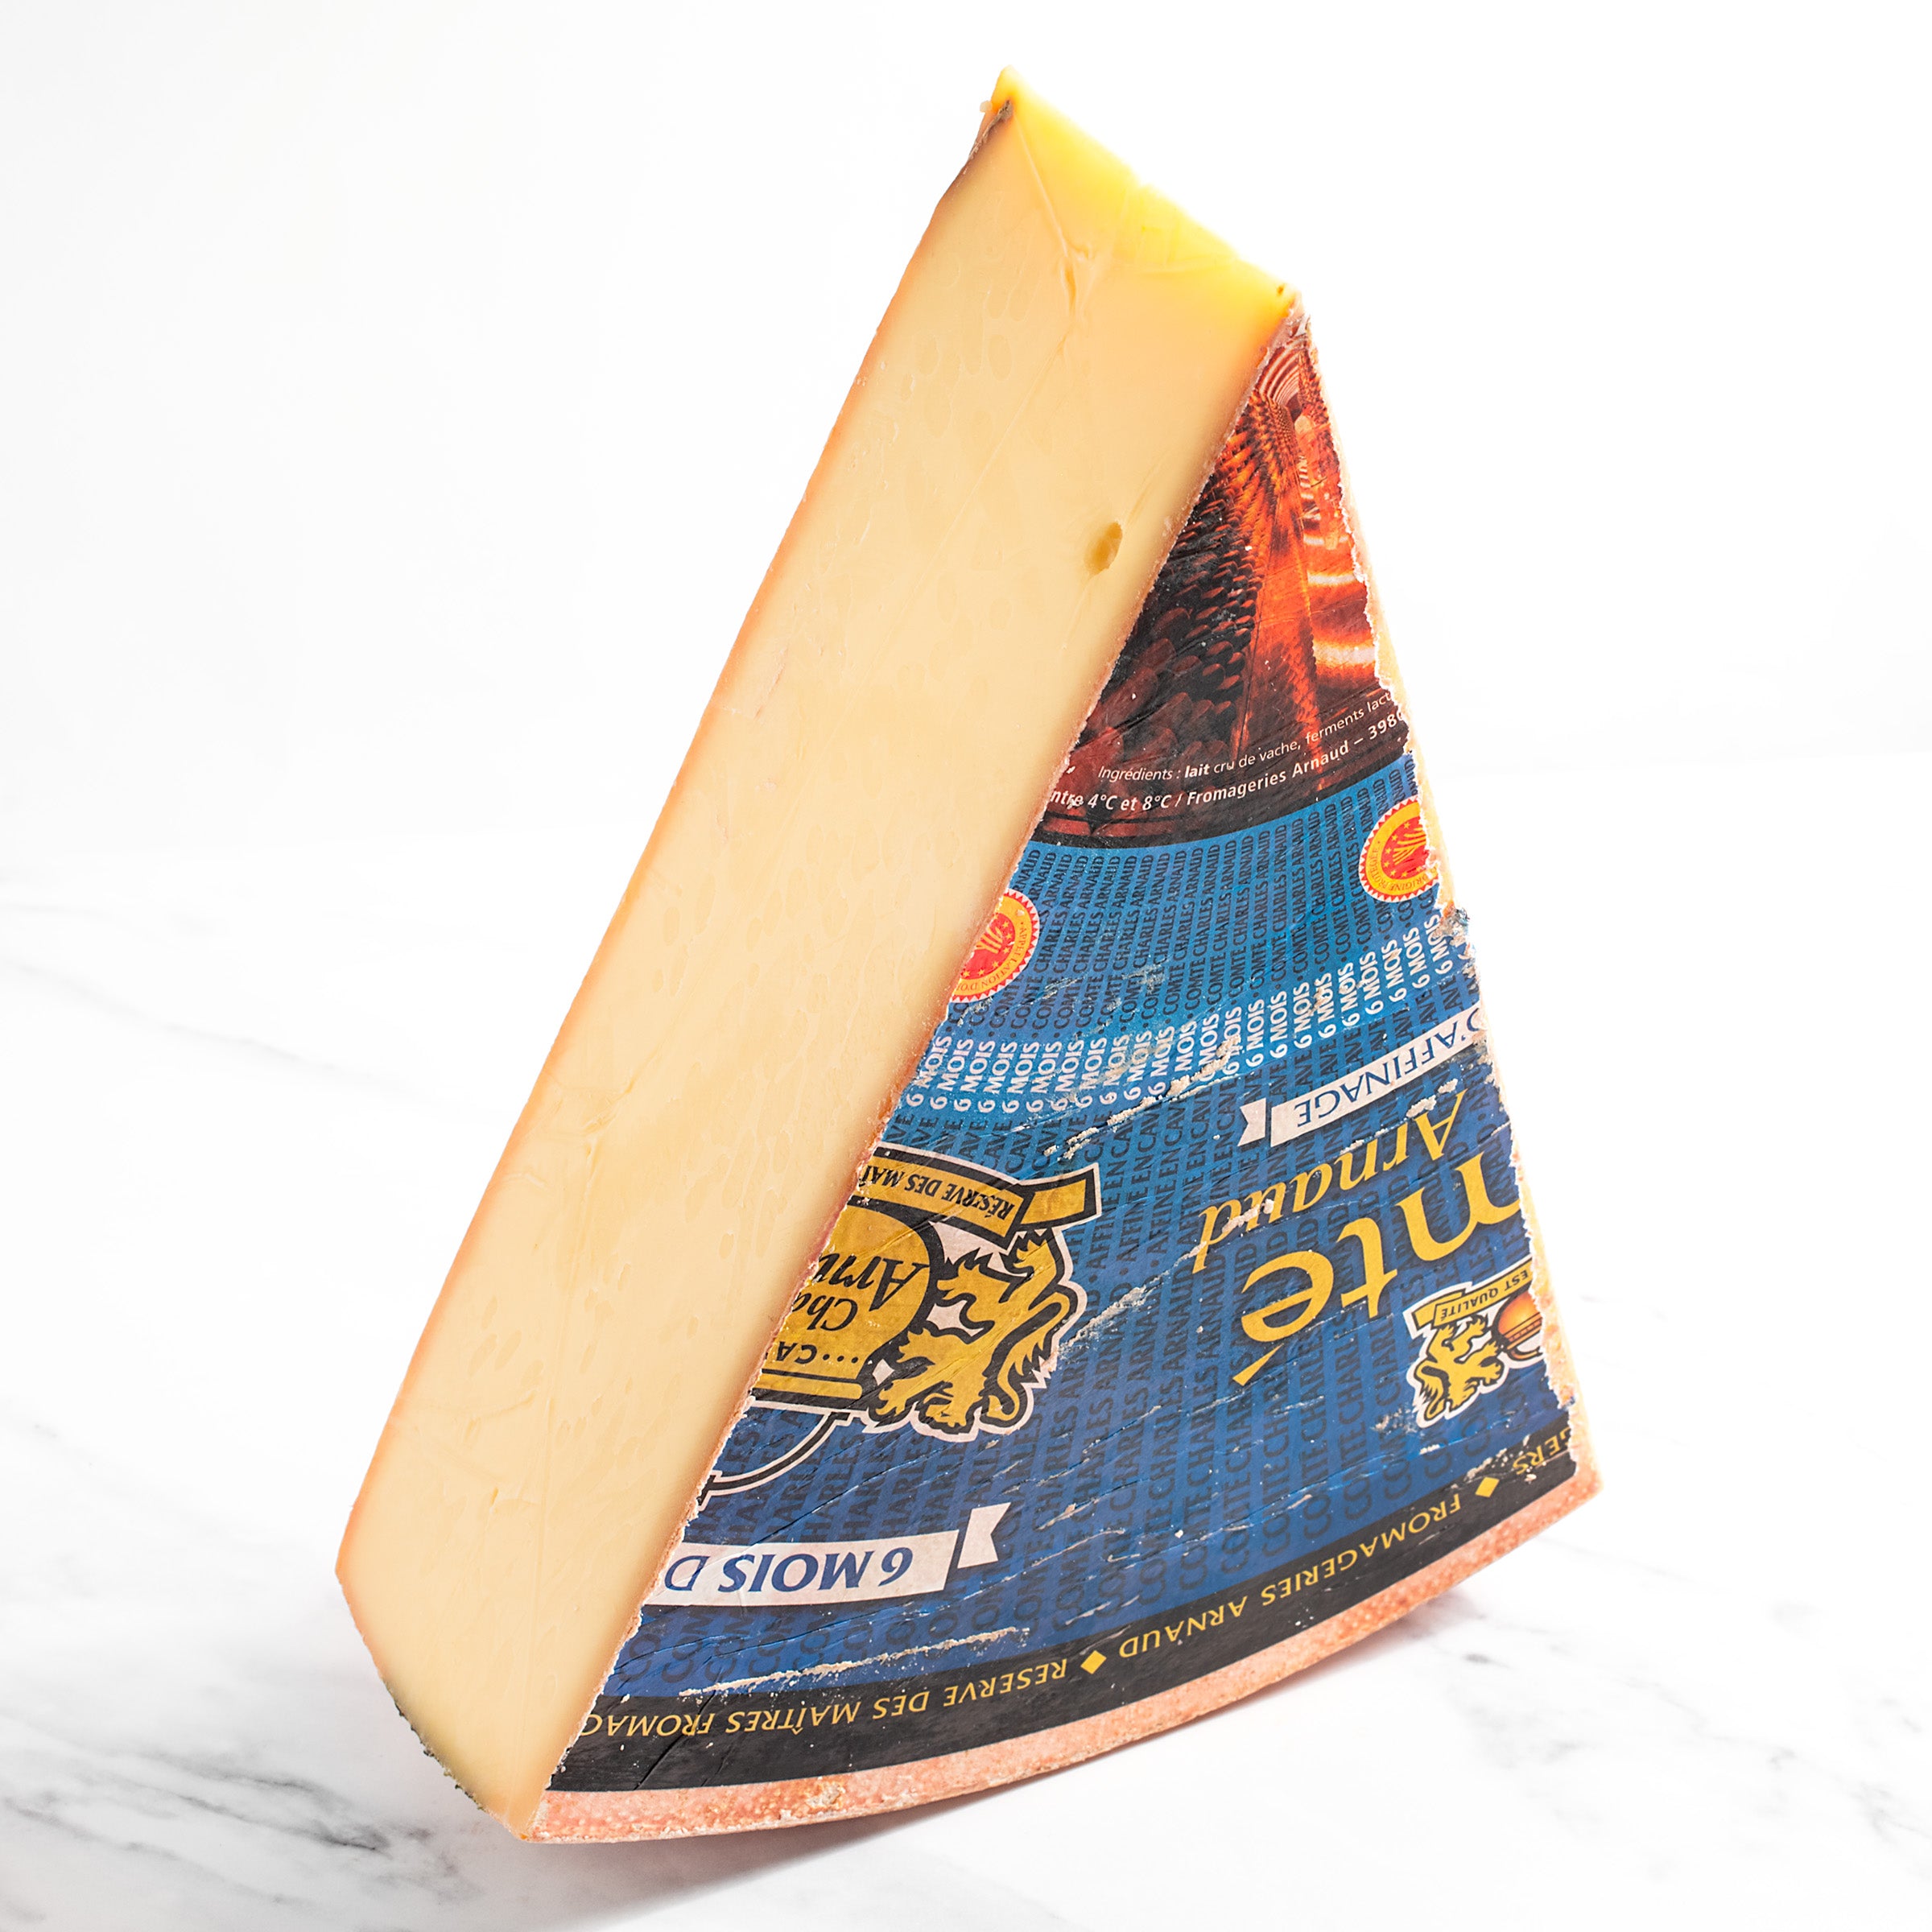 Charles Arnaud Comte AOP 6 Month Aged_Cut & Wrapped by igourmet_Cheese